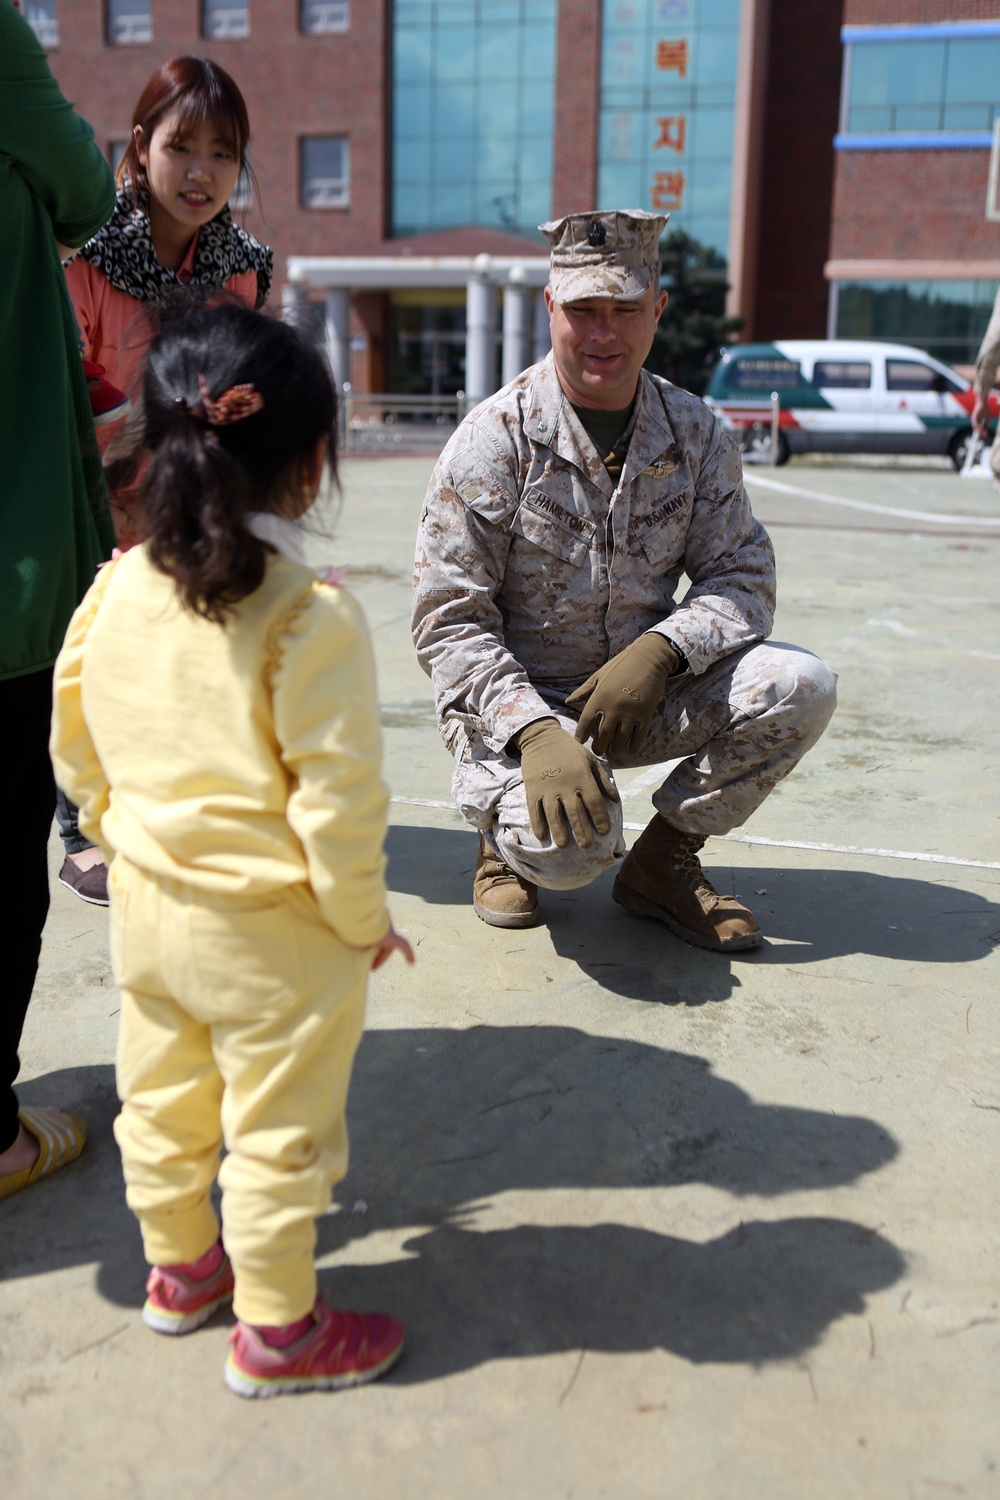 31st MEU Marines spend the day with orphans in Pohang